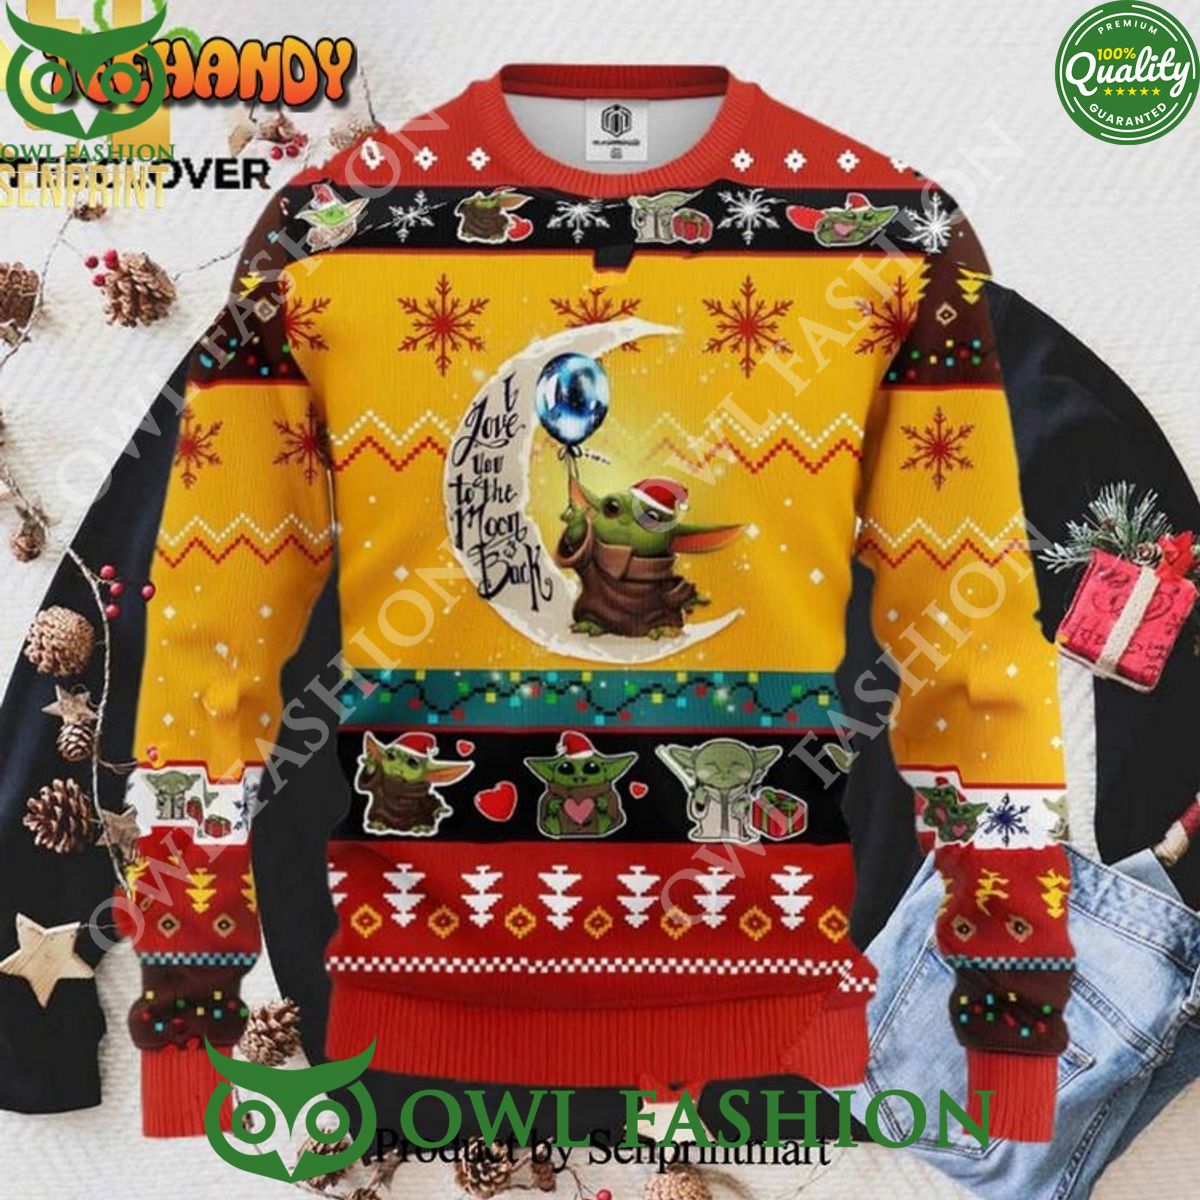 baby yoda moon and back cute xmas 3d printed ugly sweater jumper trending 1 THHX6.jpg